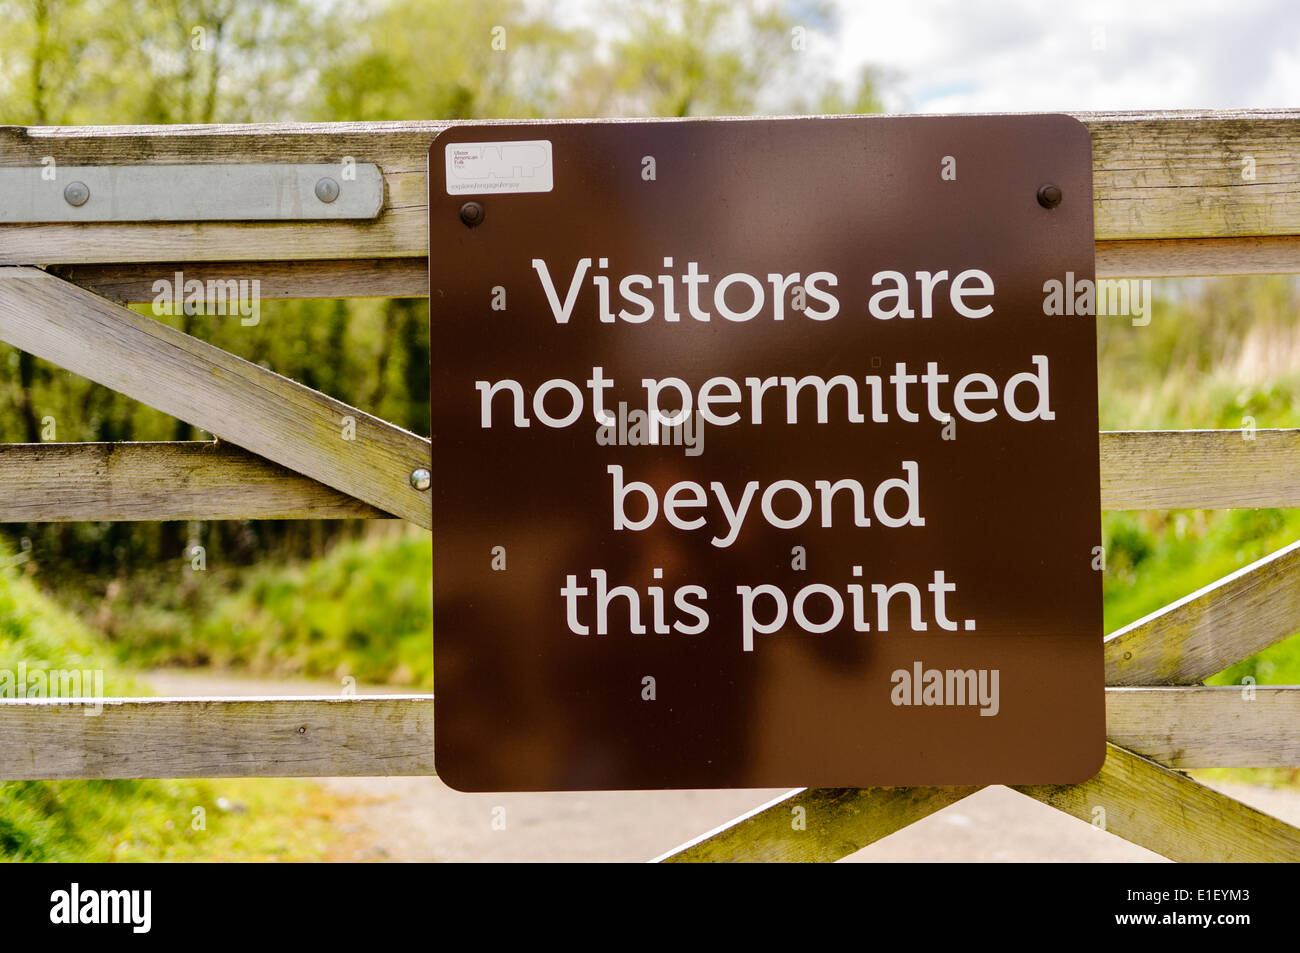 Sign advising that visitors are not permitted beyond this point Stock Photo